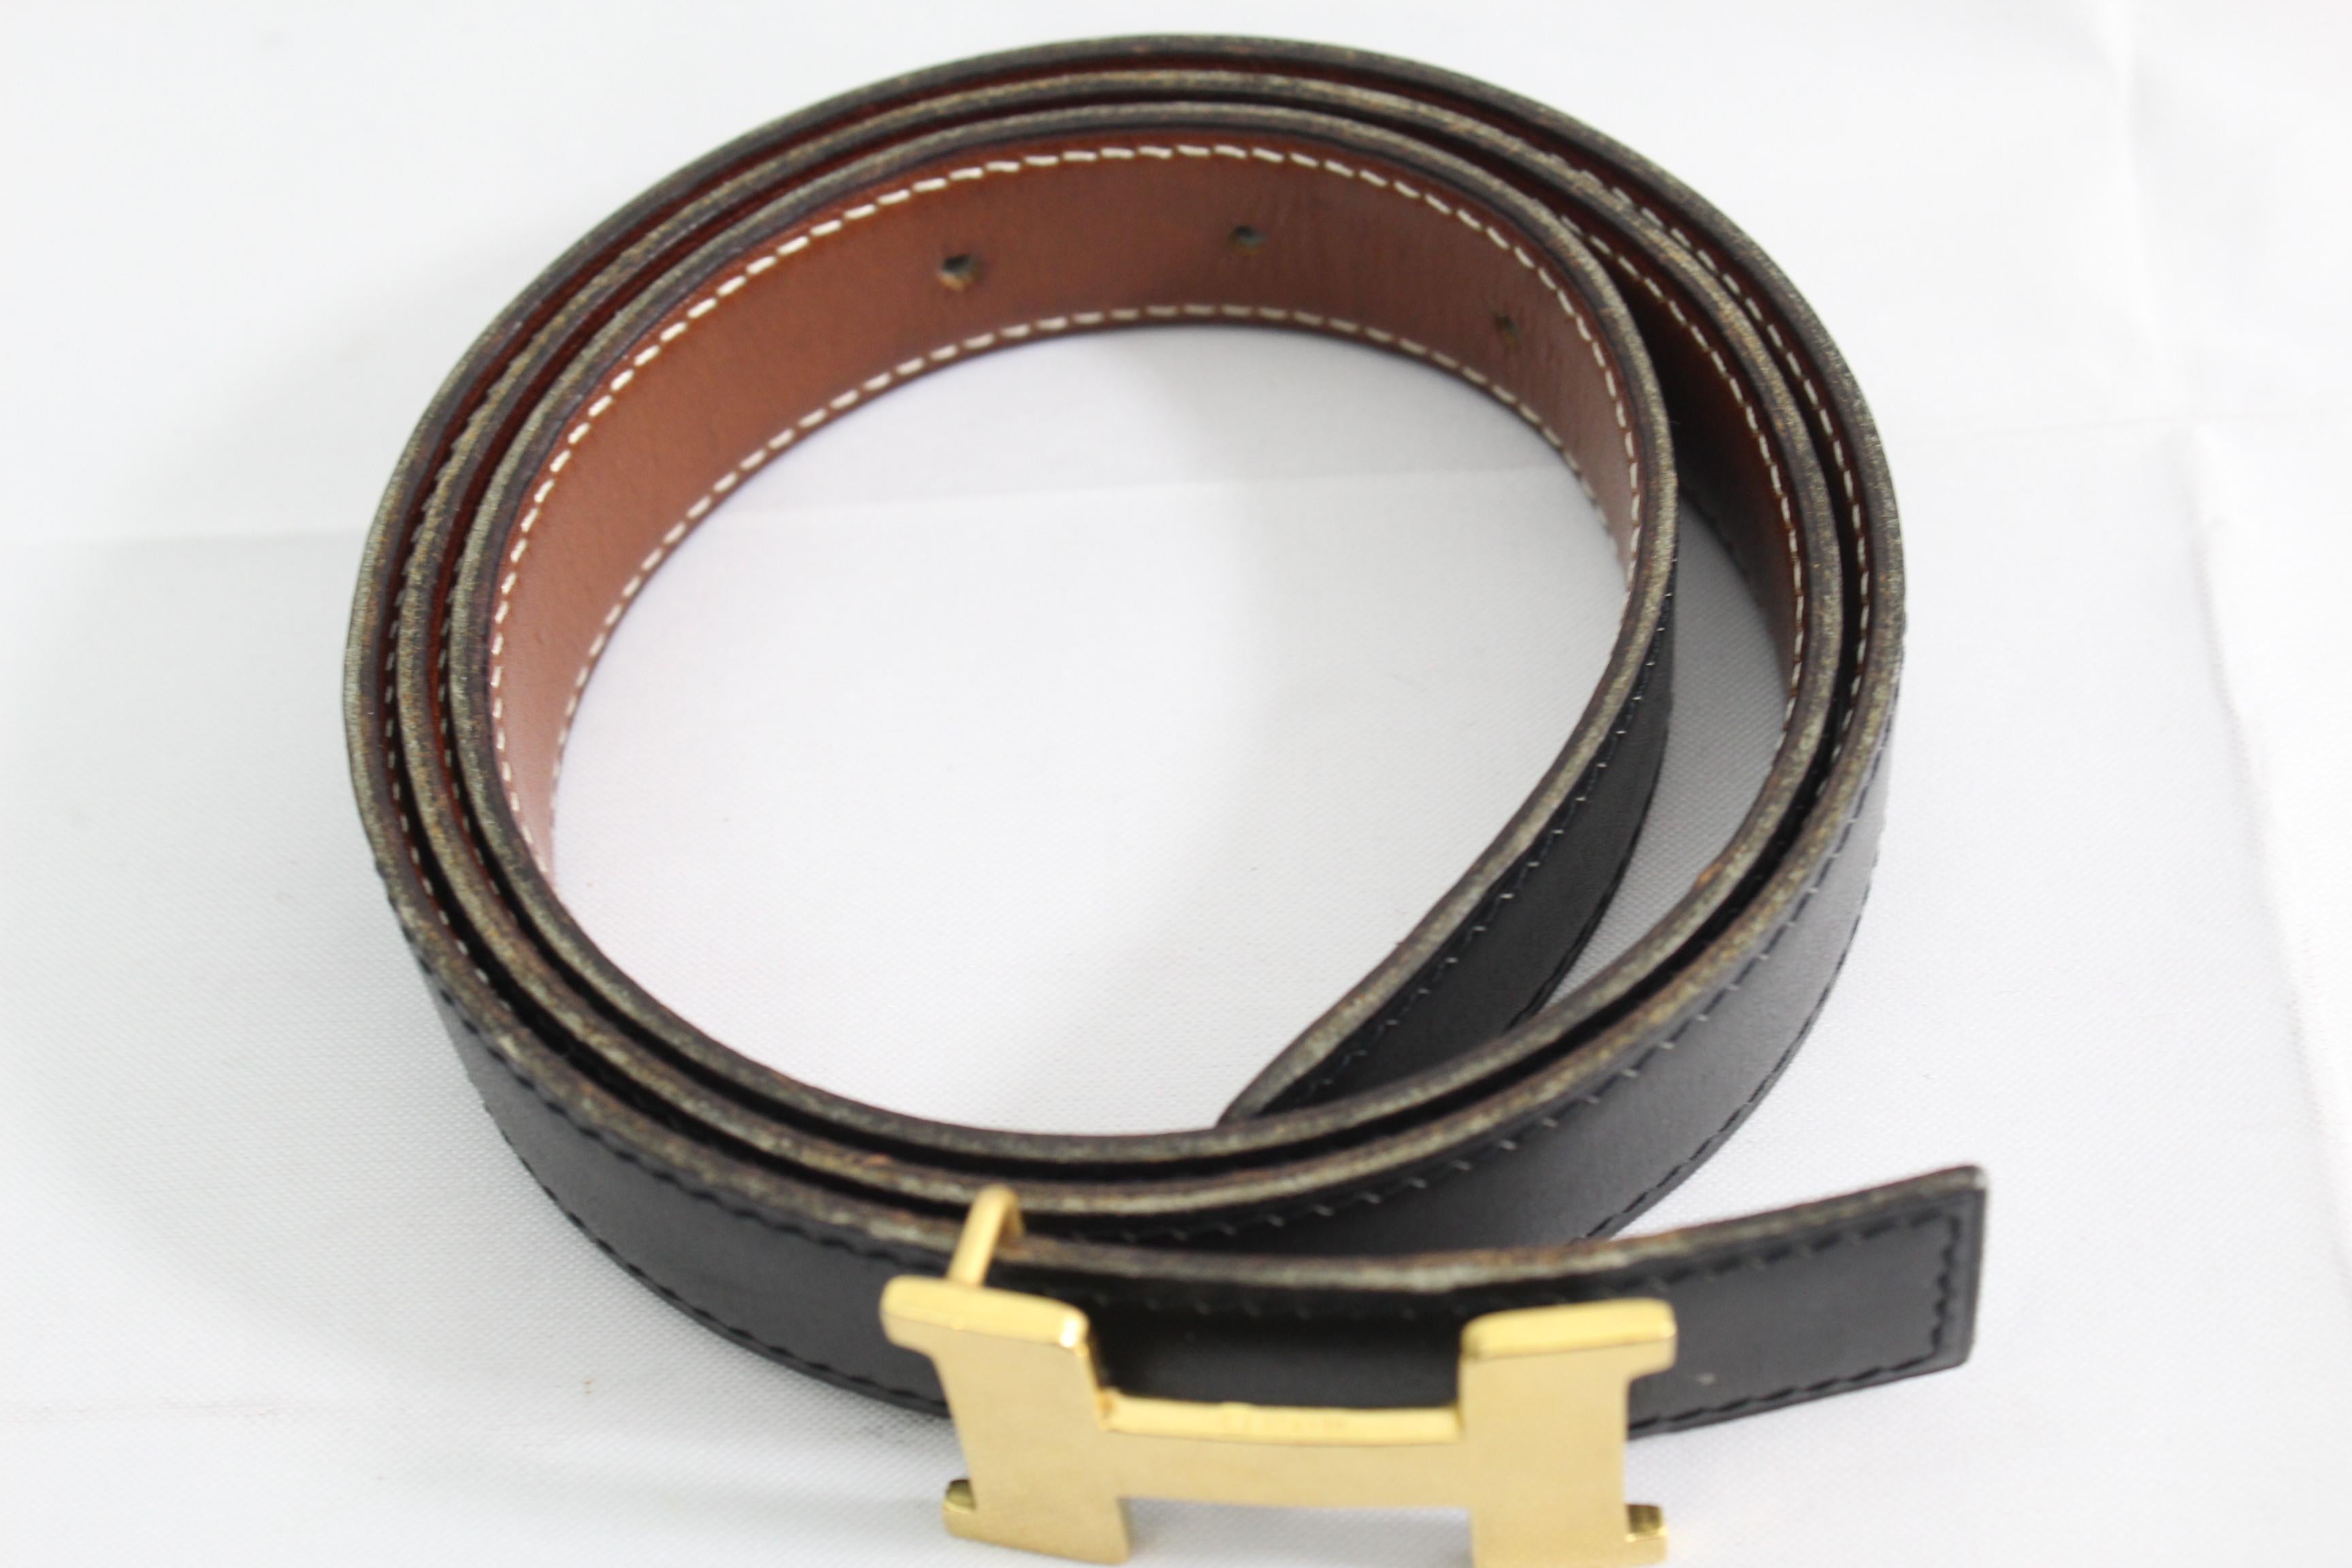 Hermes iconic belt in gold plated metal and brown black leather.


Smallmodel frm buckle

nice condition but some signs of wear, small scratches in the buckle and some signs of use in the leather.

Size 84 centimeters